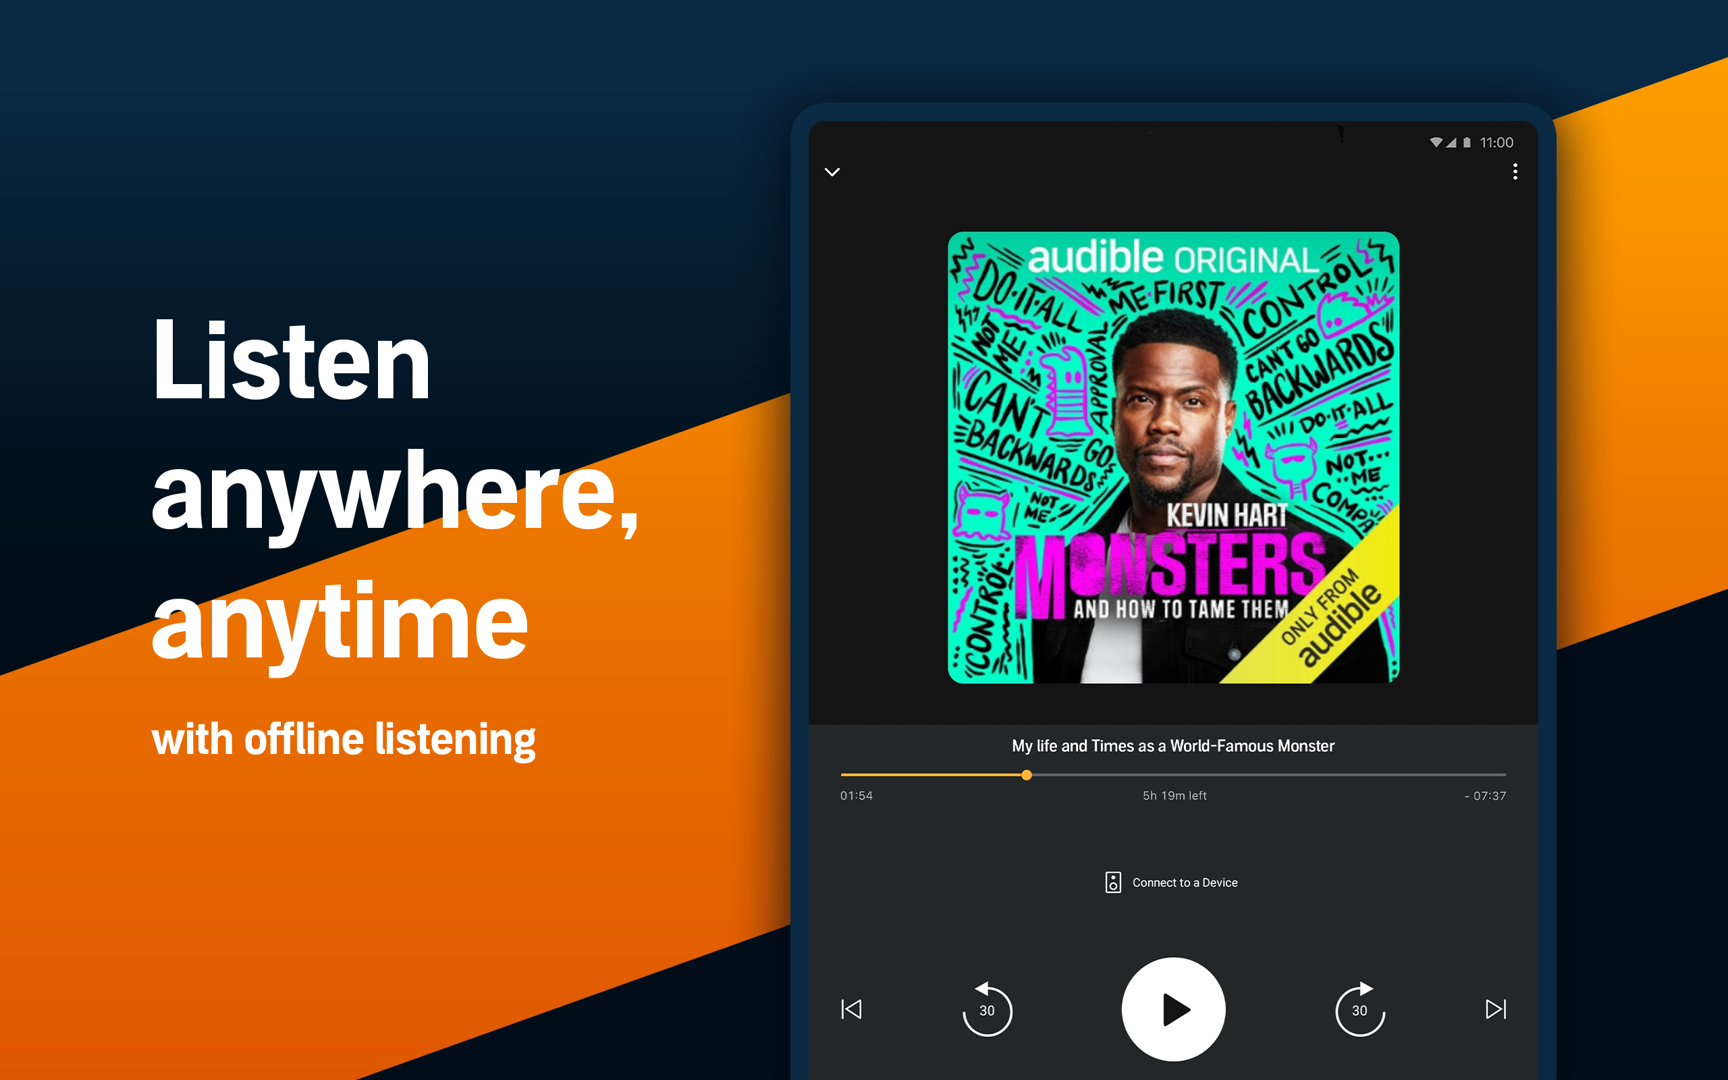 Audible App For Windows 10 Not Working? Fixed!, 44% OFF